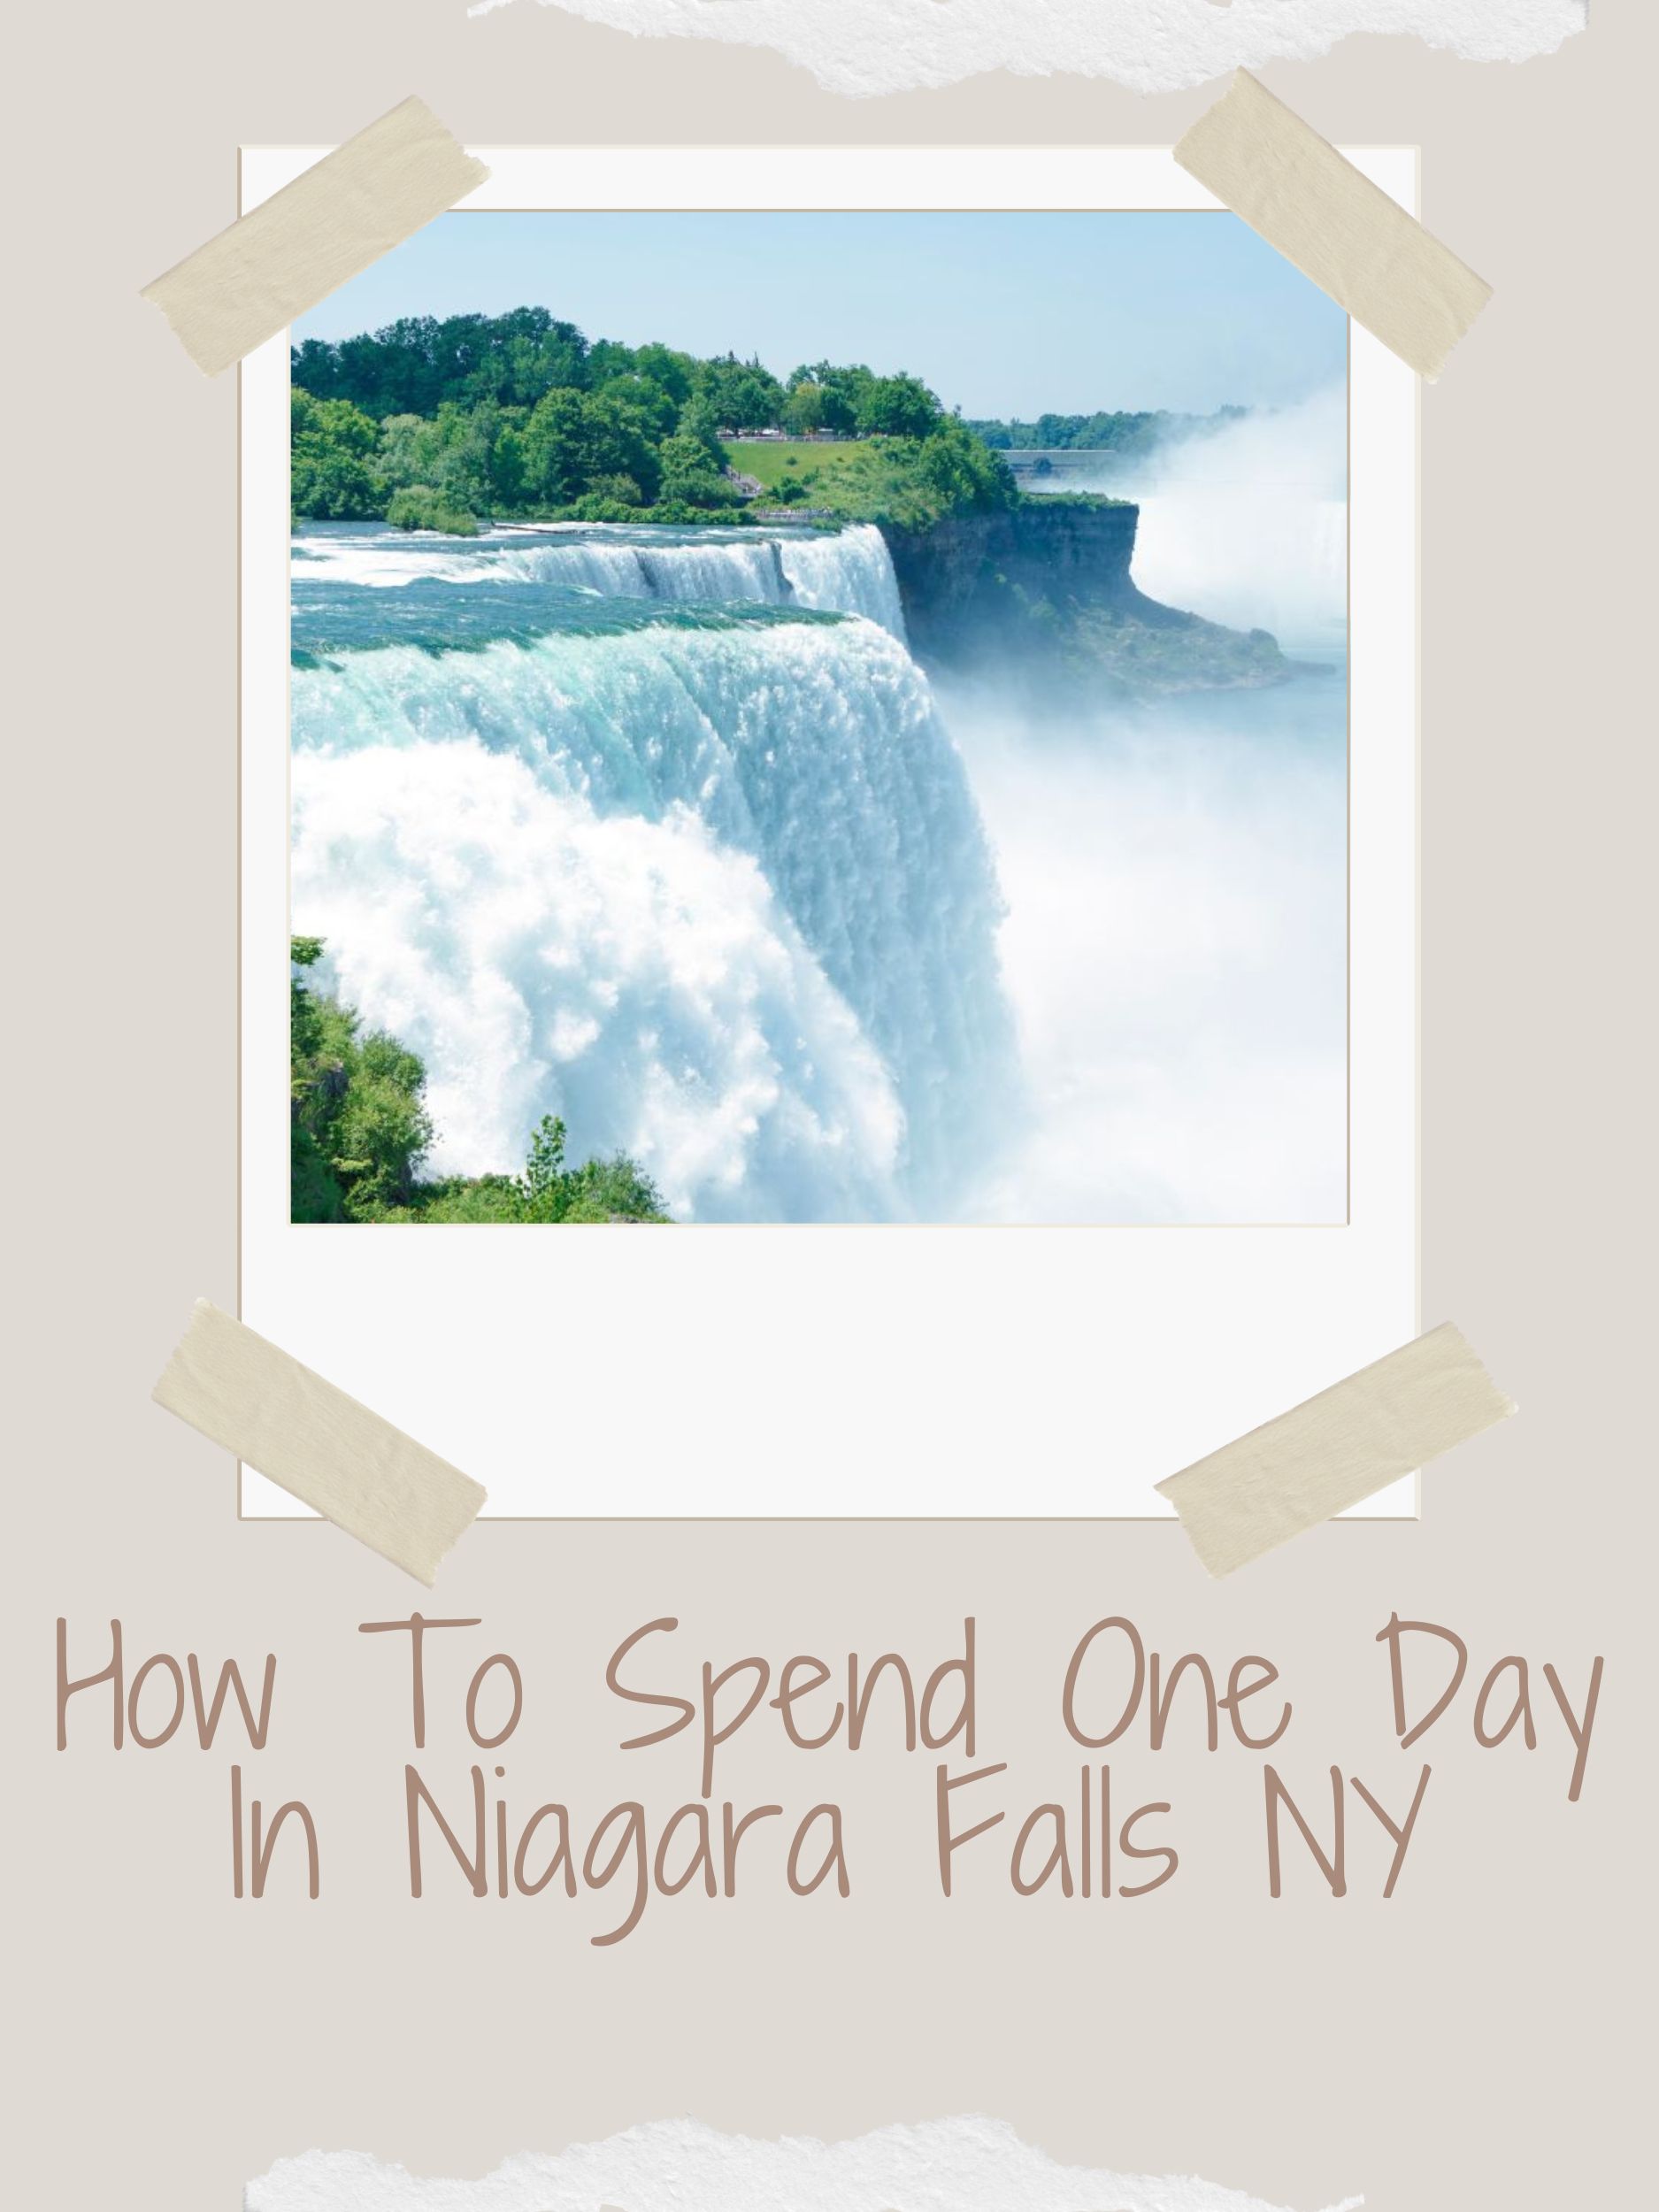 How To Spend One Day in Niagara Falls, NY